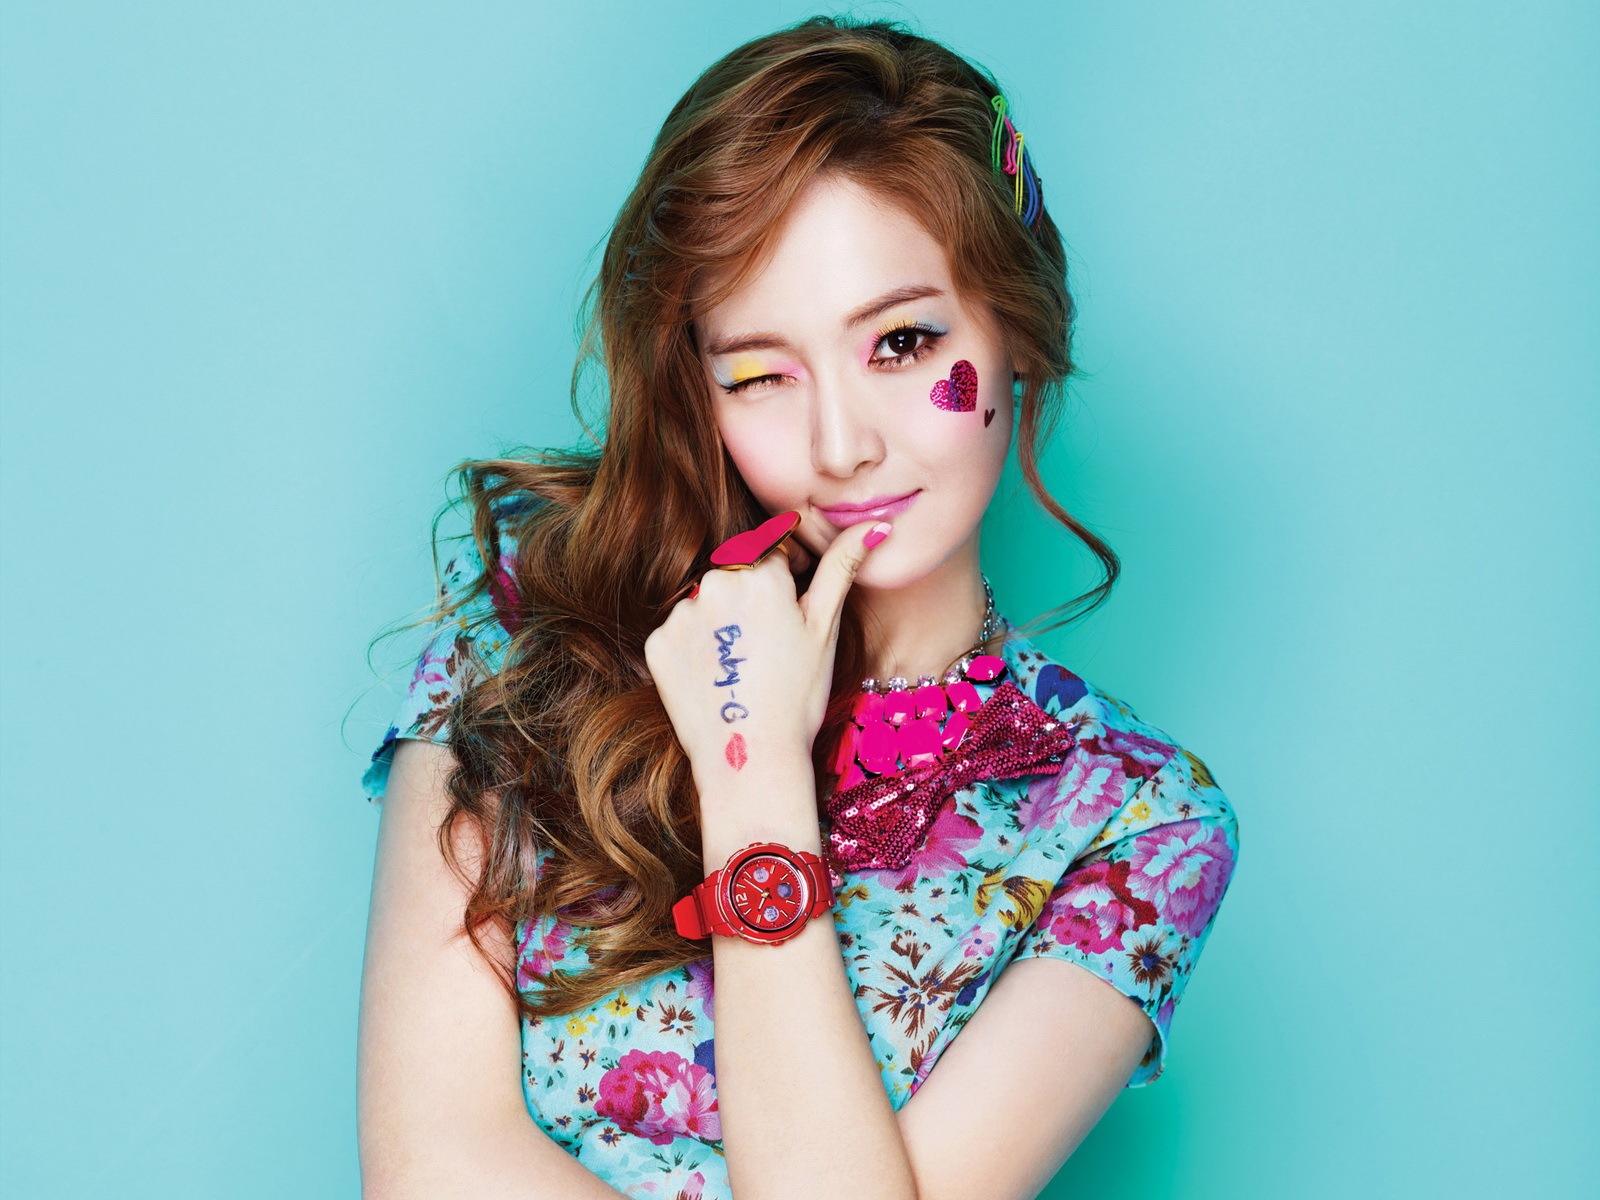 Girls Generation SNSD Casio Kiss Me Baby-G wallpapers #5 - 1600x1200